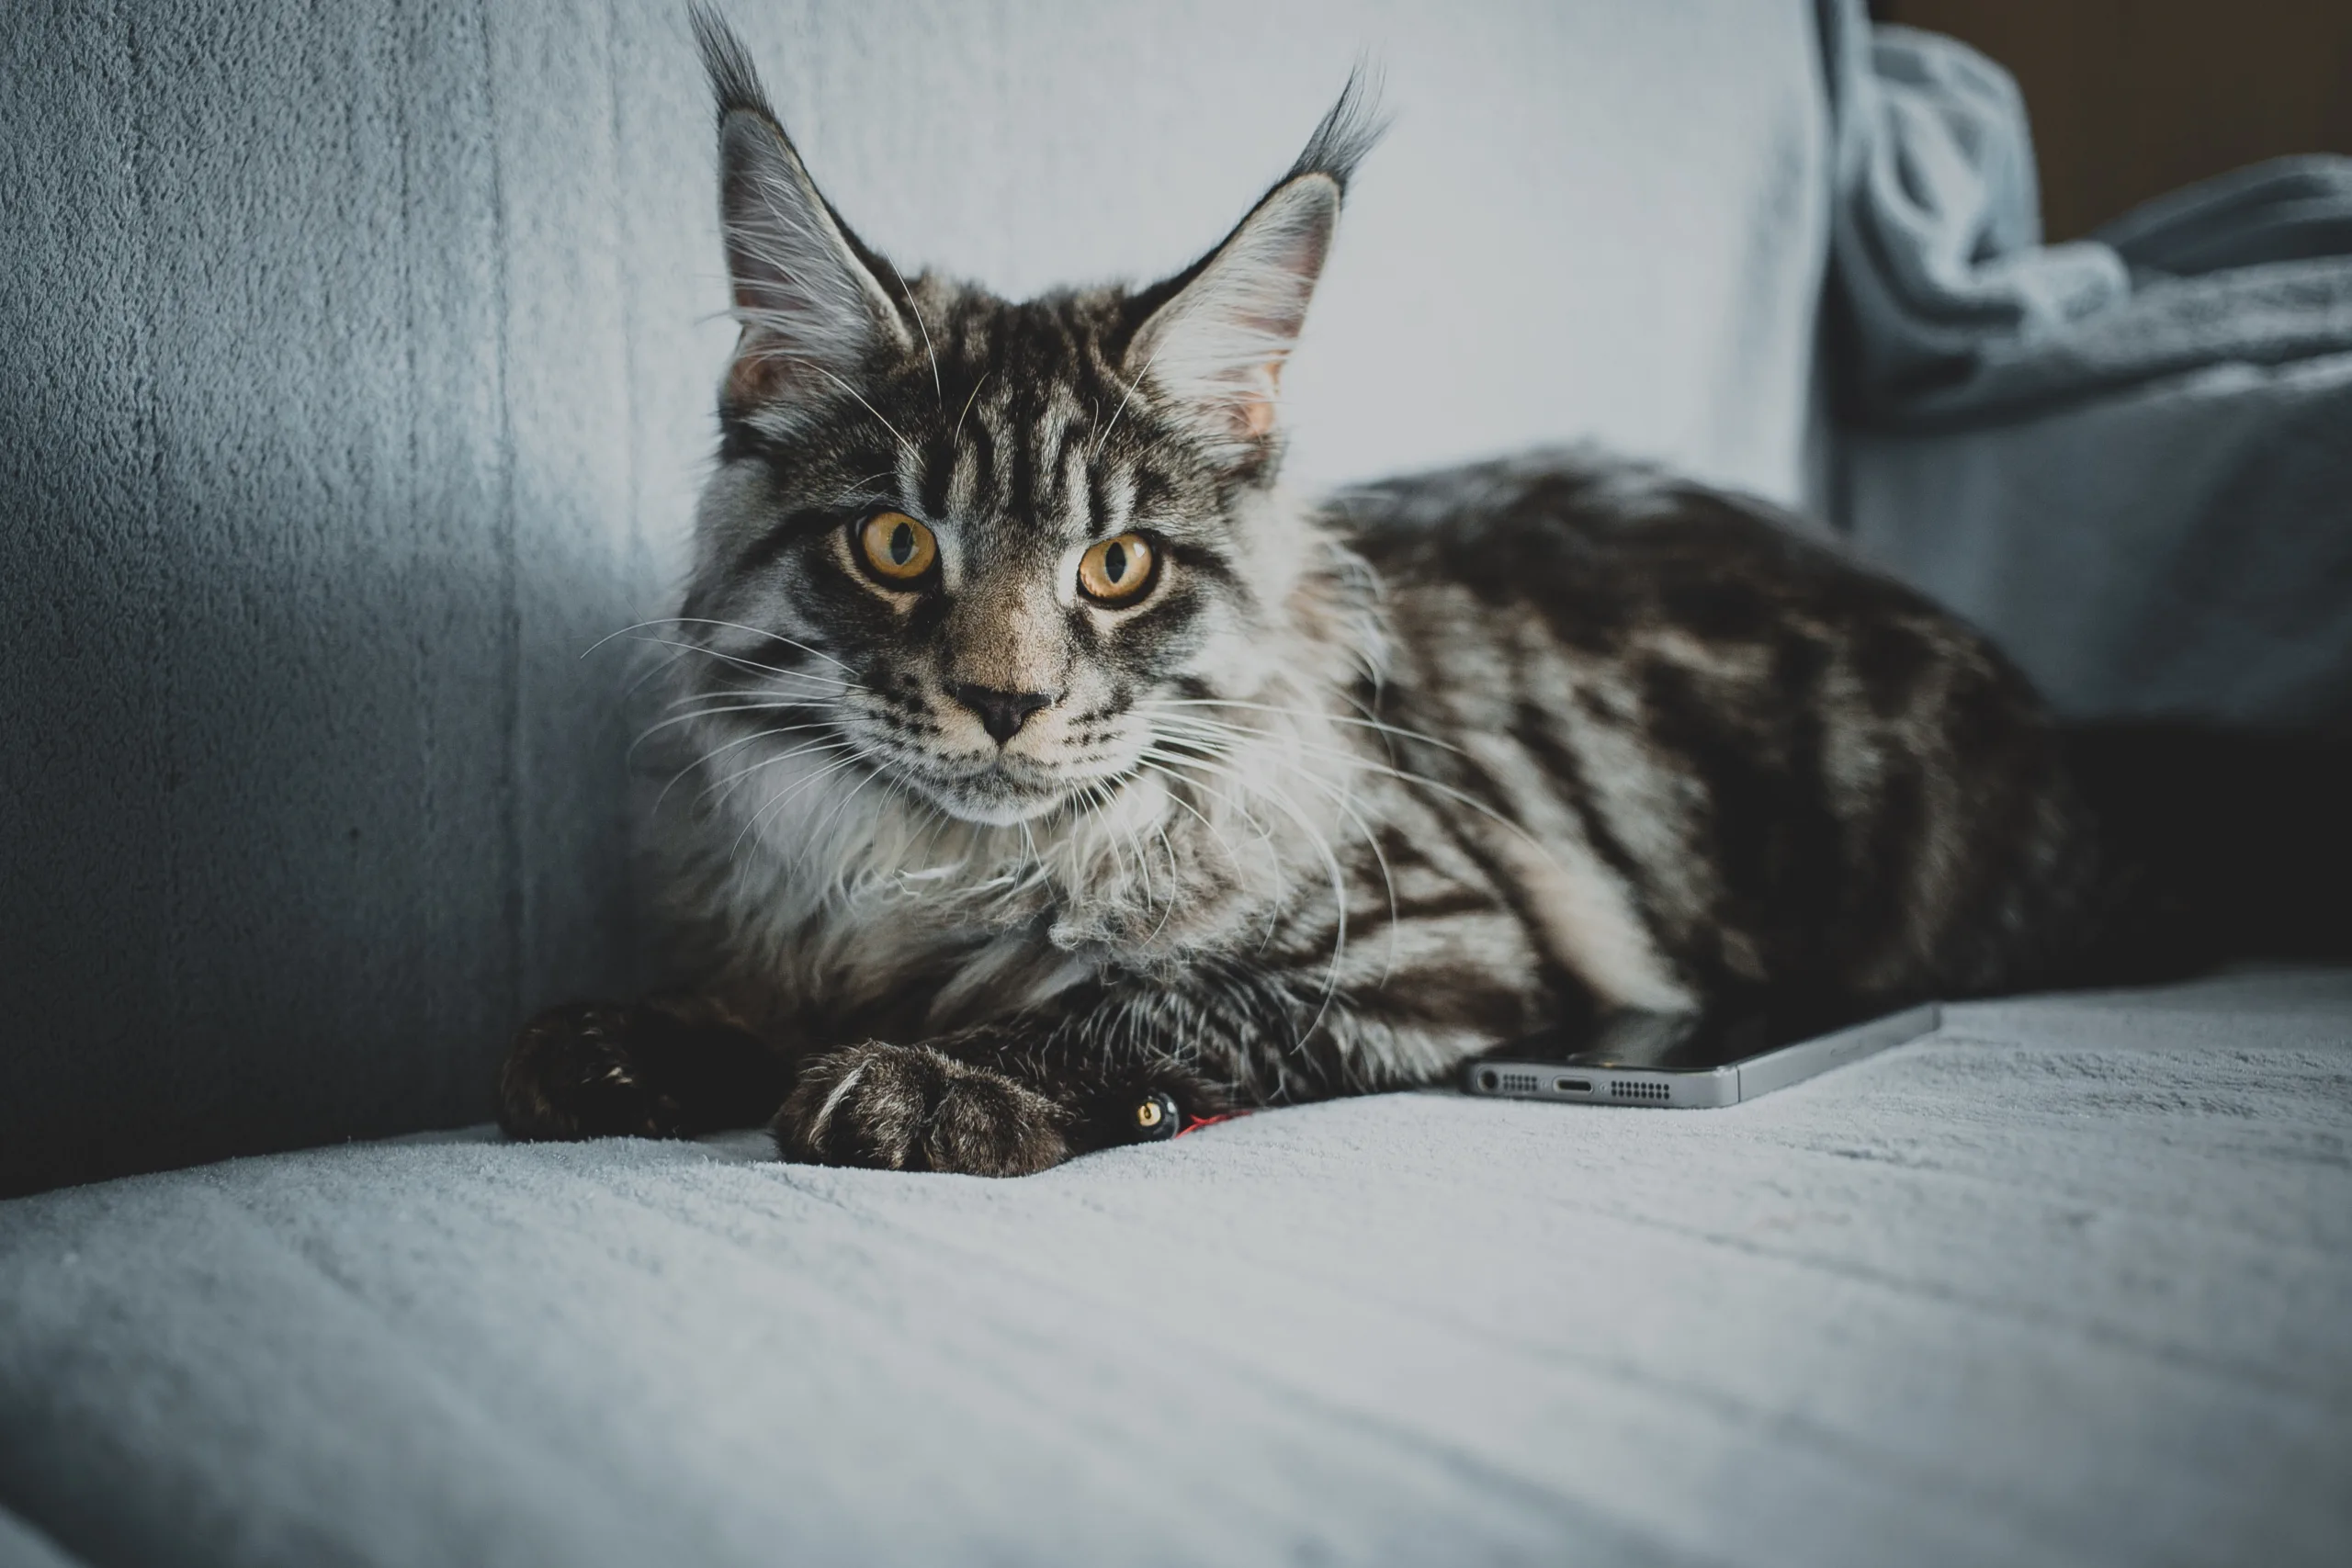 how much are maine coon cats